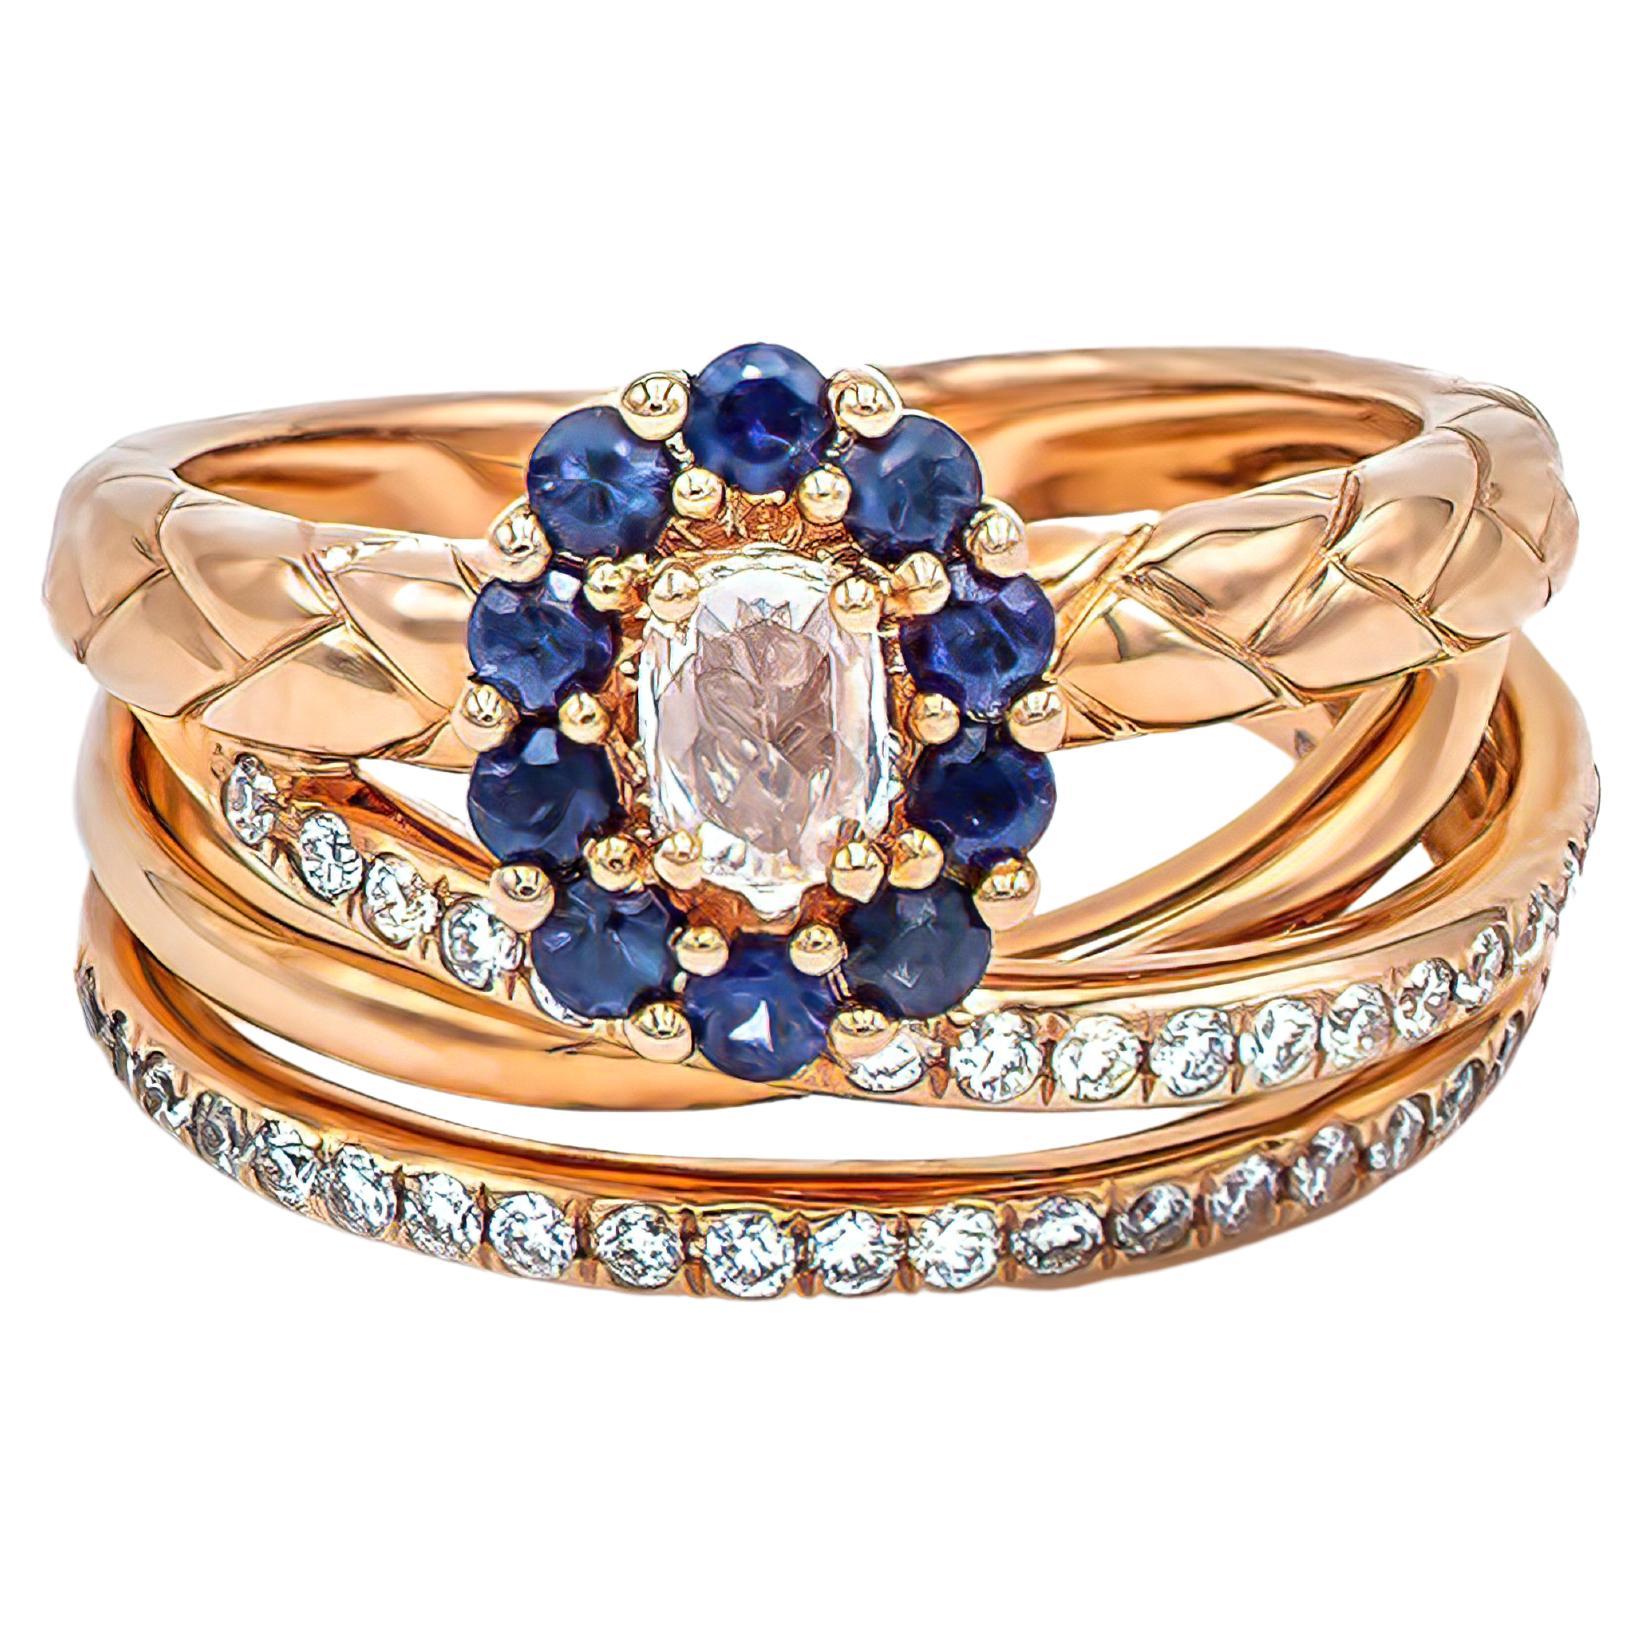 Rose Cut Diamond in Blue Sapphire Halo Set in 18k Gold & Dia Fancy Cocktail Ring